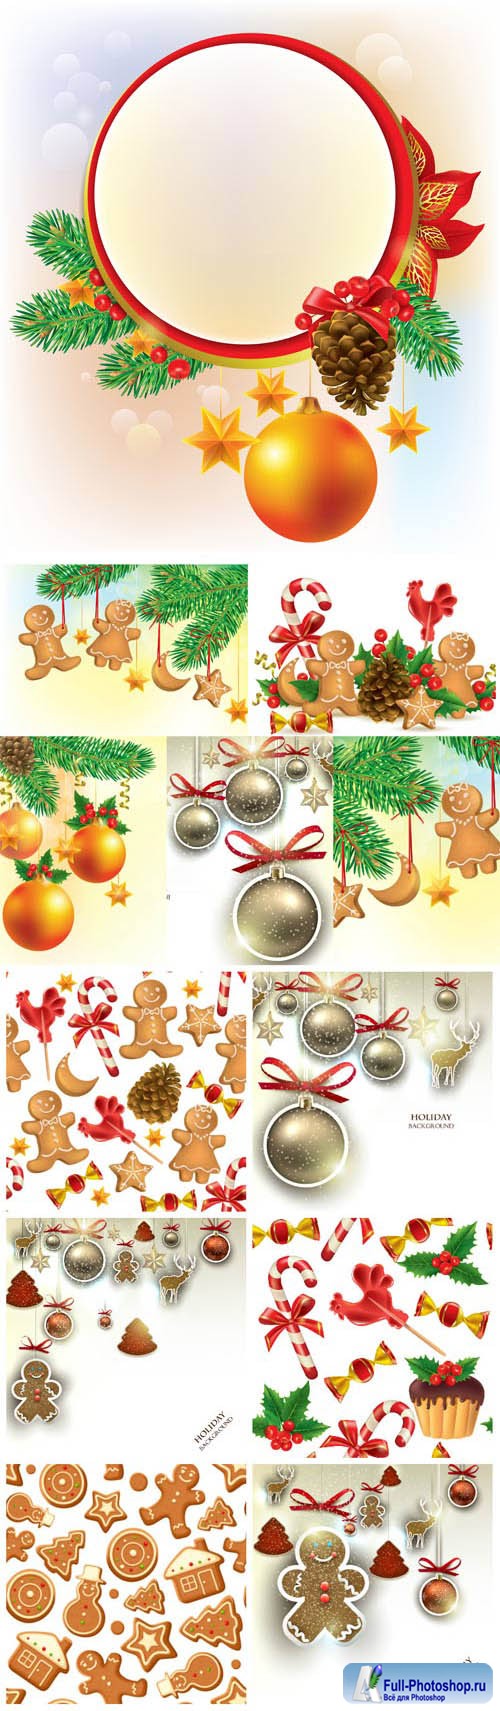 New Year and Christmas illustrations in vector 48